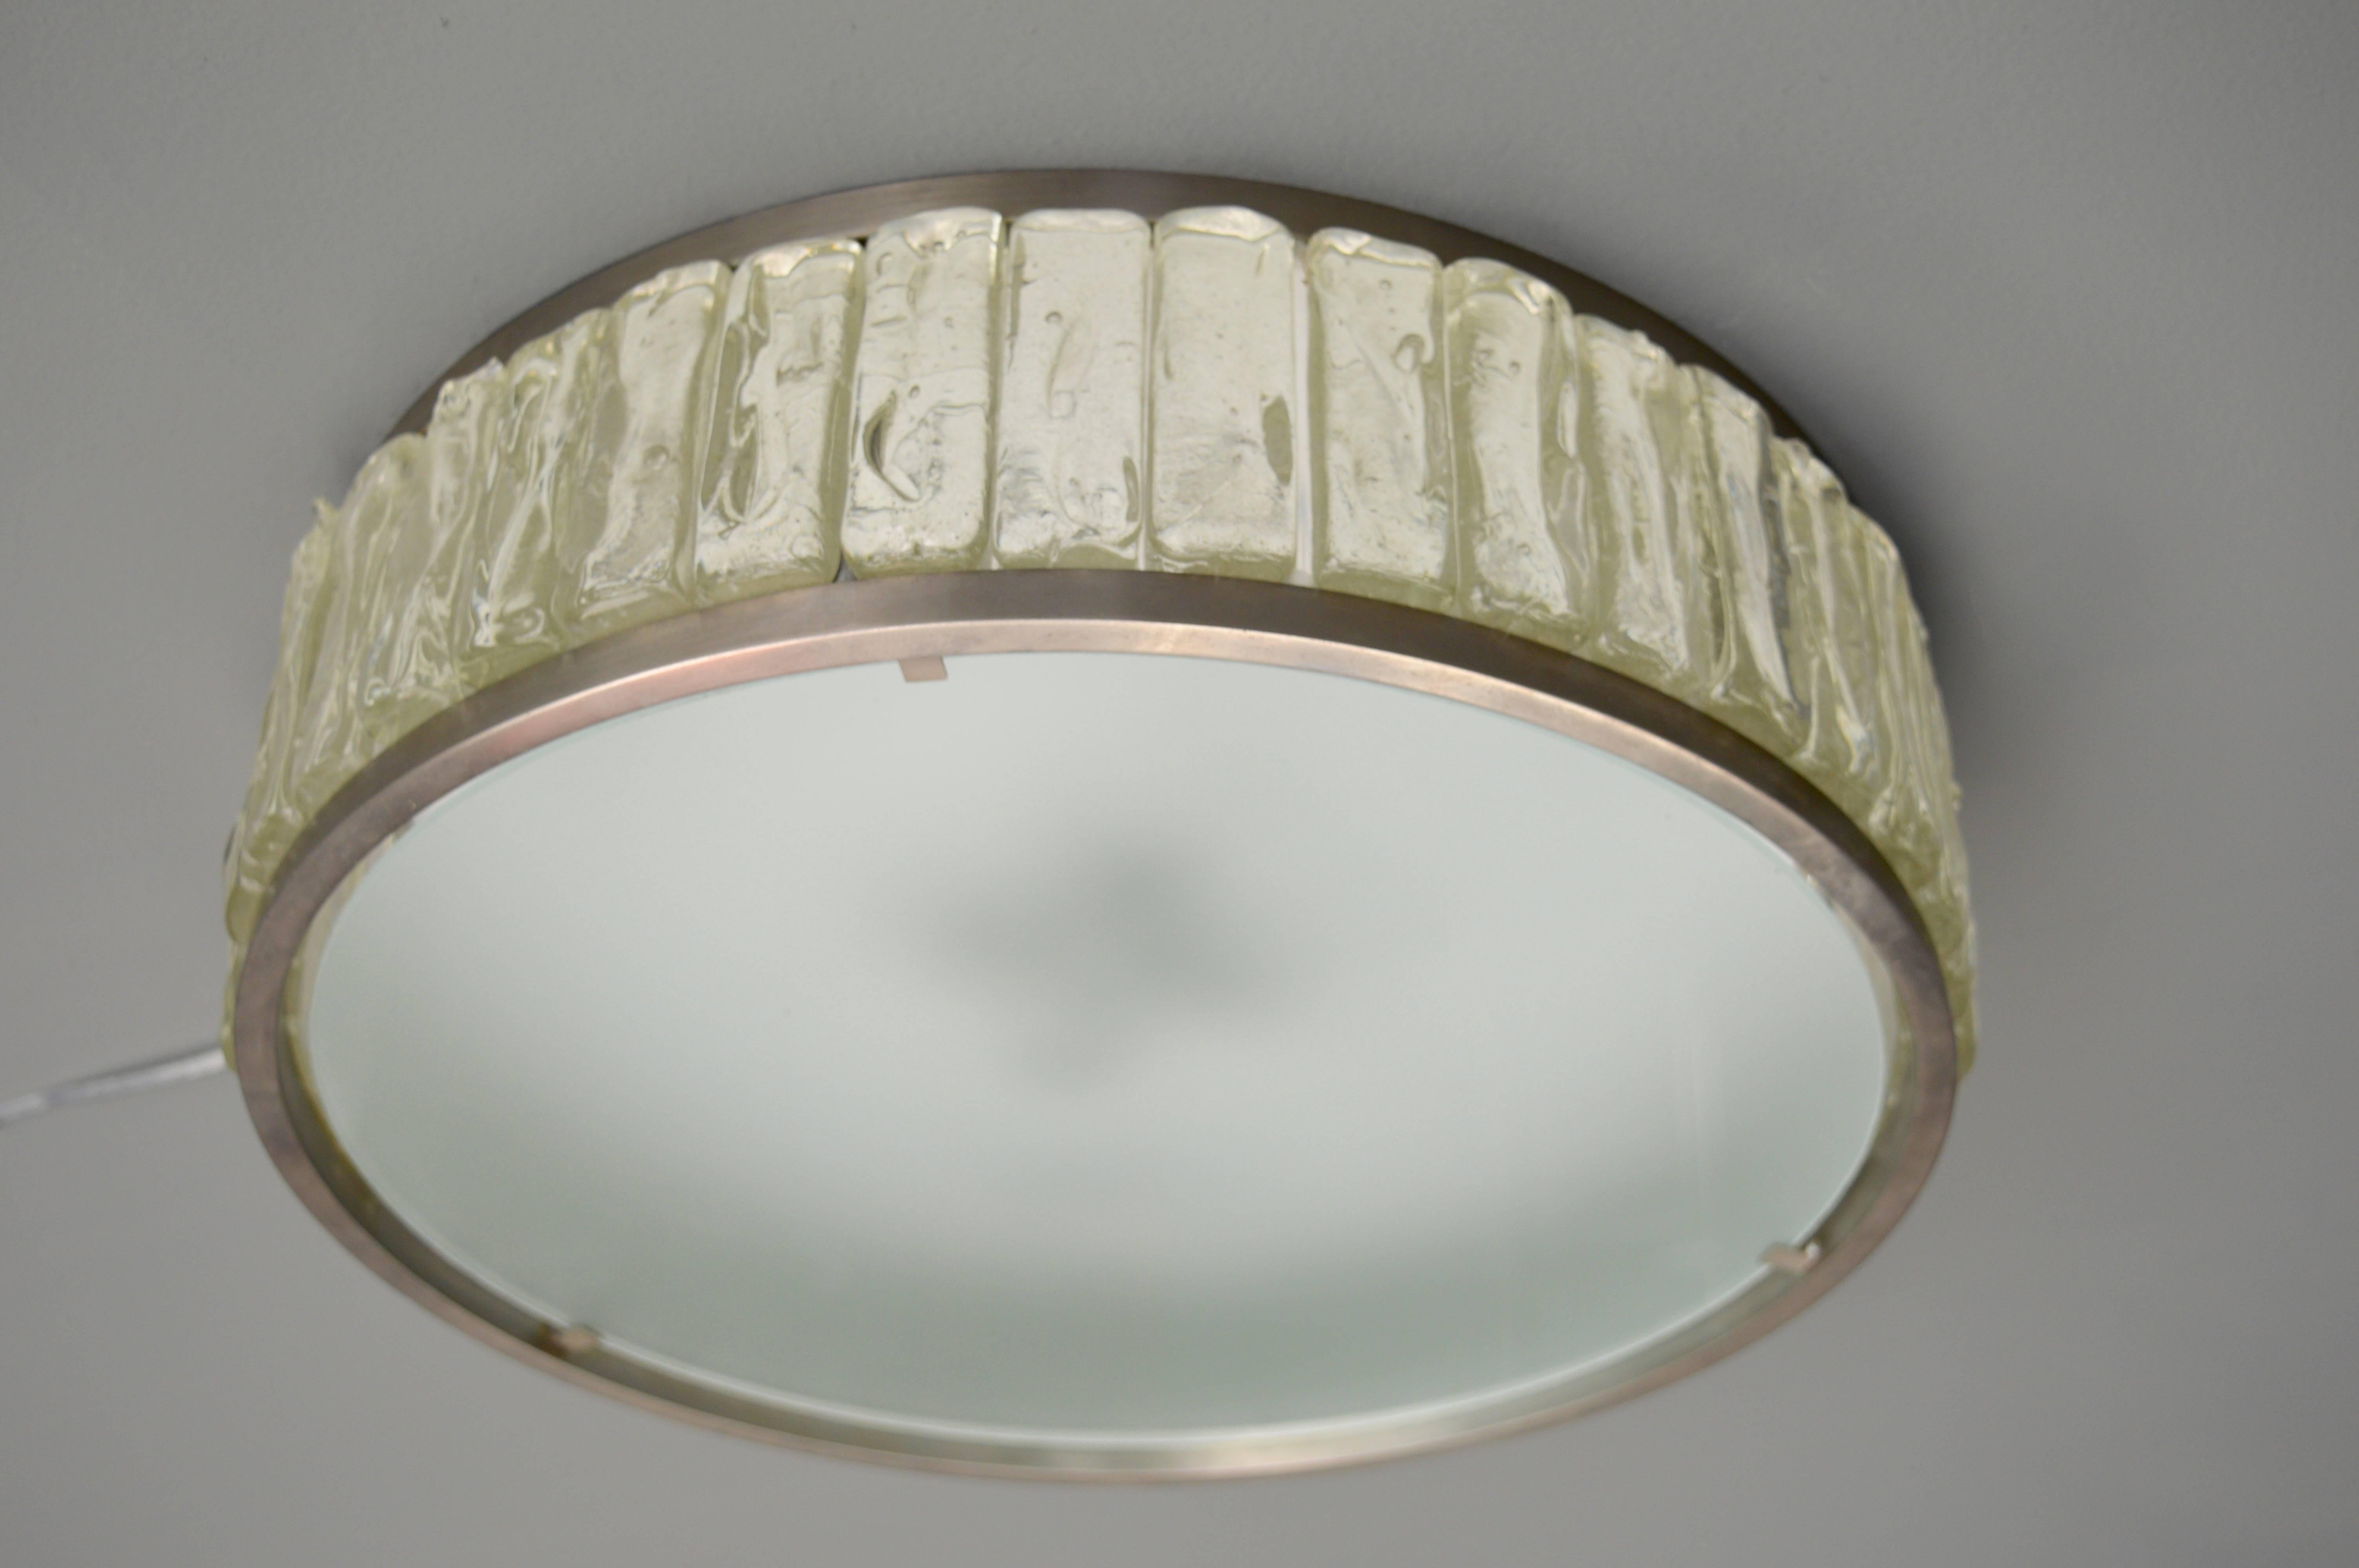 Exquisite vintage flush mount by Jean Perzel. Circular flush mount with nickel-plated brass hardware and milky glass diffuser. Rectangular ice glass blocks are sandwiched between two nickel discs. Newly rewired. Four European sockets. Excellent